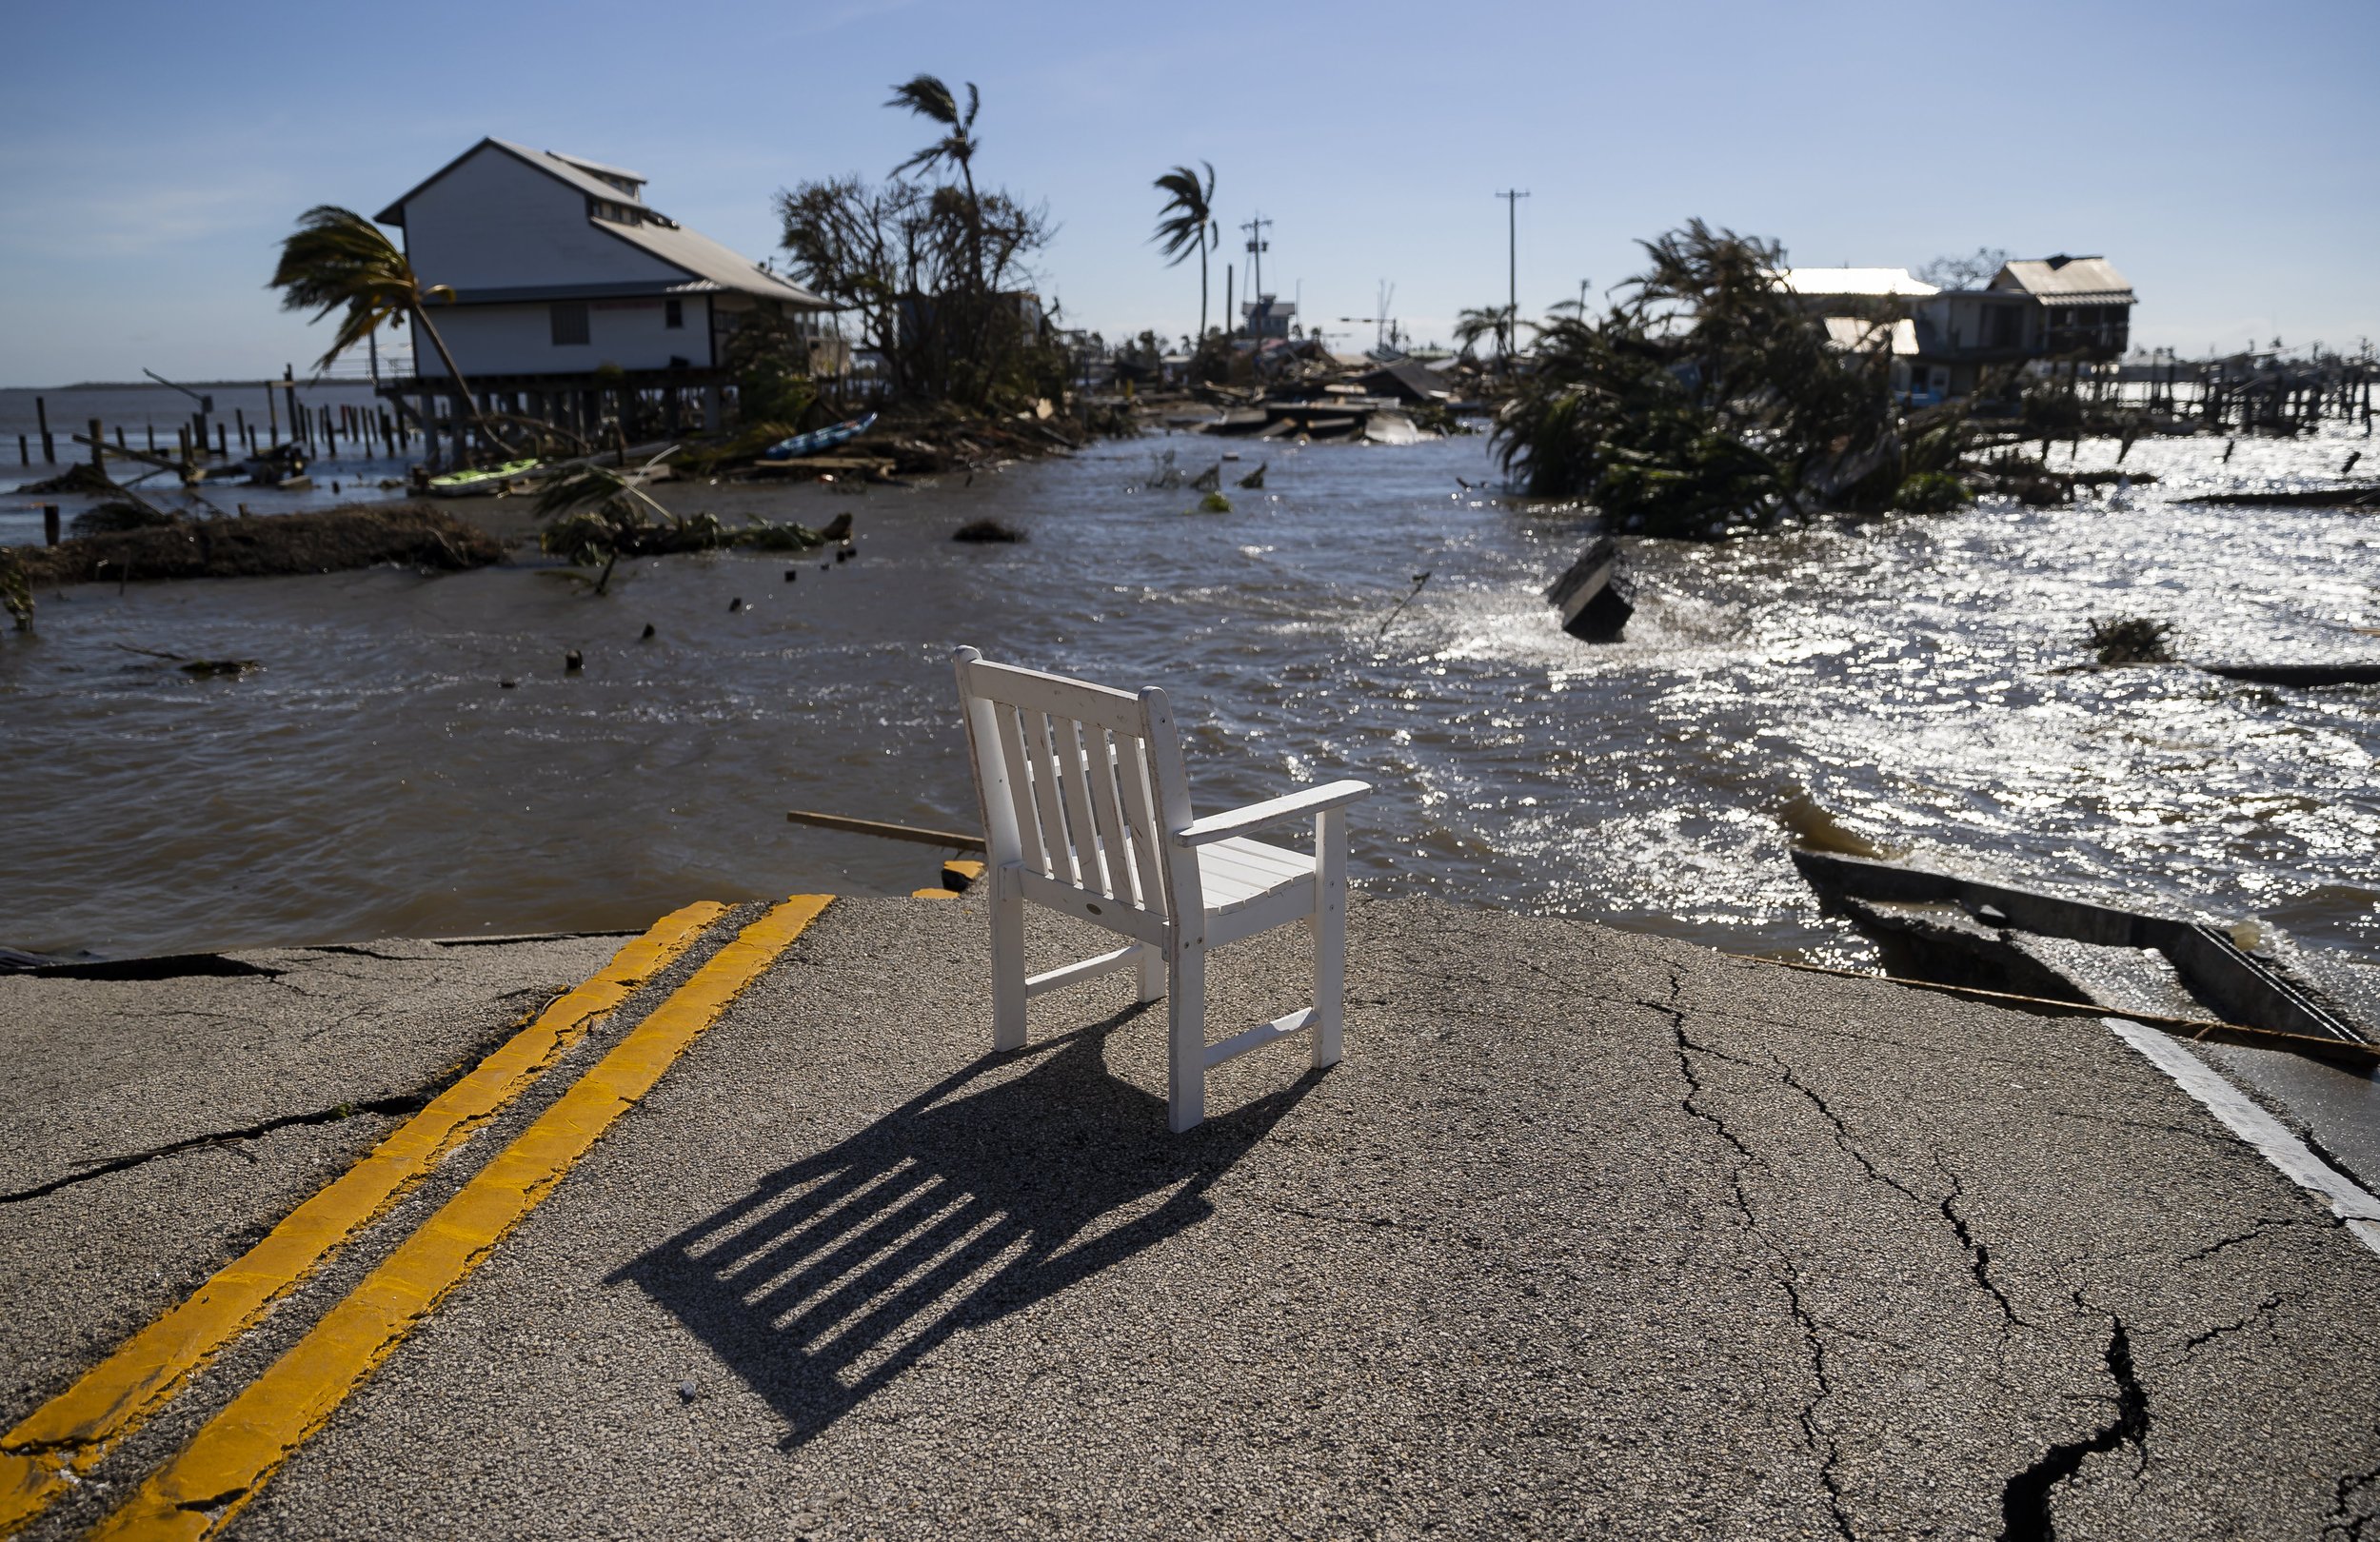  Gulf water flows through a broken section of Pine Island Road on Thursday, Sept. 29, 2022, in Matlacha, Fla. Hurricane Ian made landfall on the coast of South West Florida as a category 4 storm Wednesday afternoon leaving areas affected with flooded